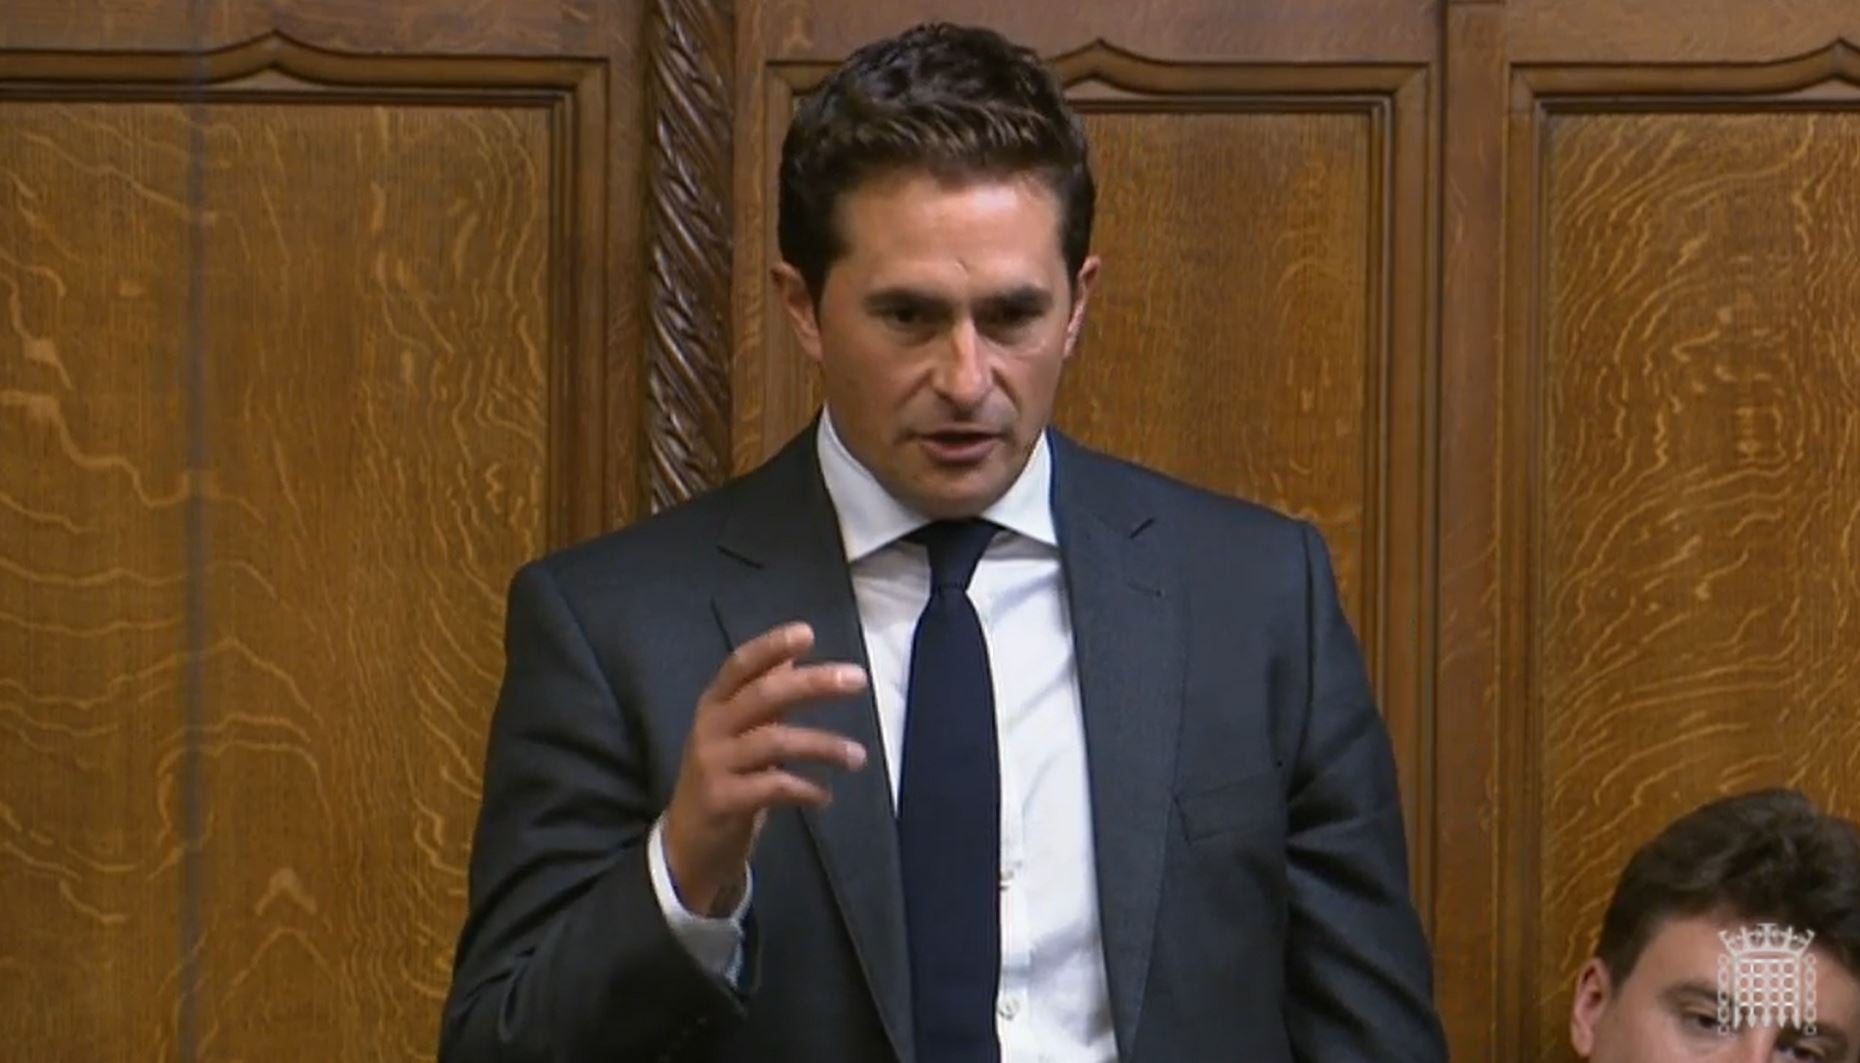 Conservative MP Johnny Mercer secretly travelled to Ukraine over the past week, he has revealed (House of Commons/PA)